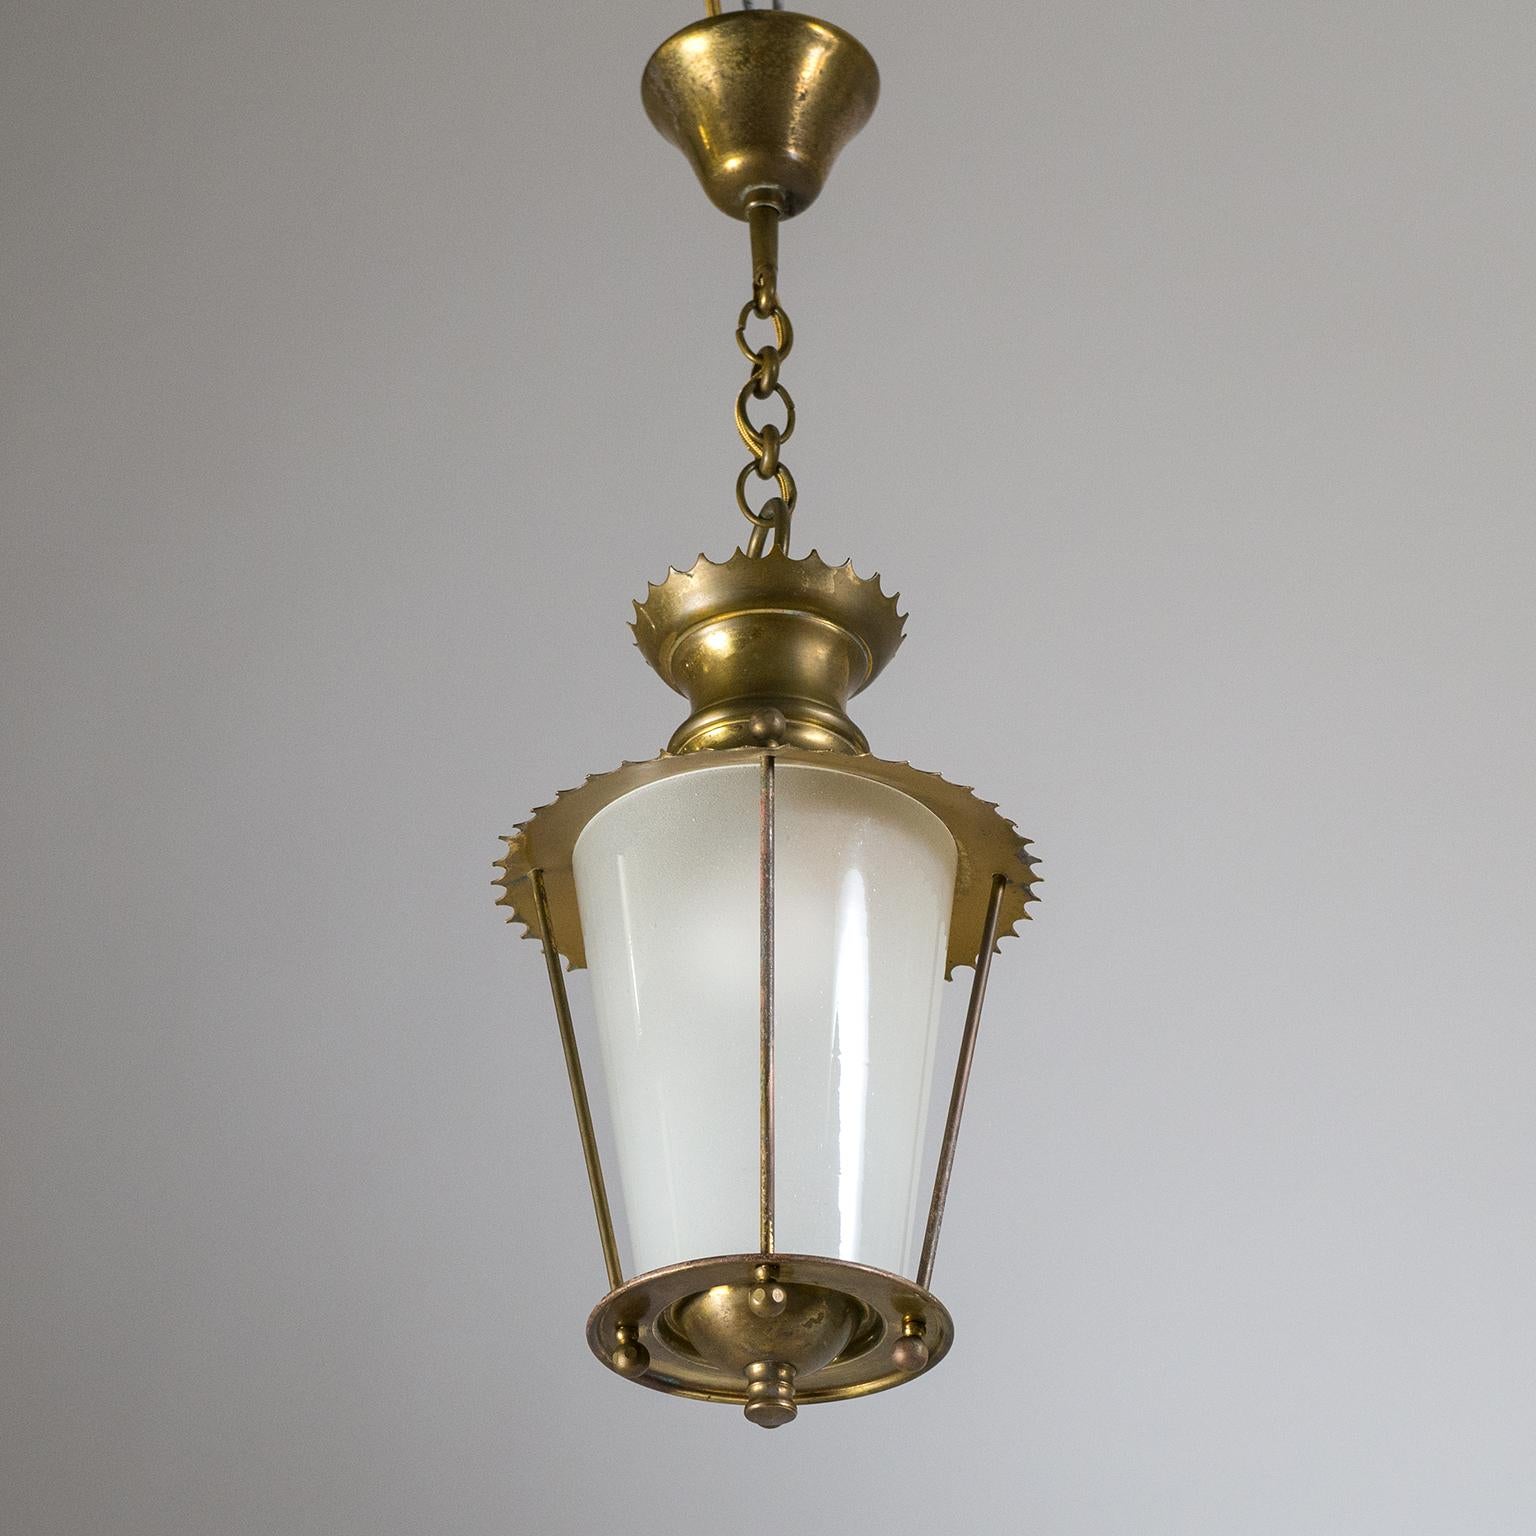 Charming petite French midcentury brass and glass lantern. The conical glass diffuser is frosted on the inside and held by all brass hardware with nice scalloped rims. Fine original condition with patina on the brass. One brass and ceramic E14